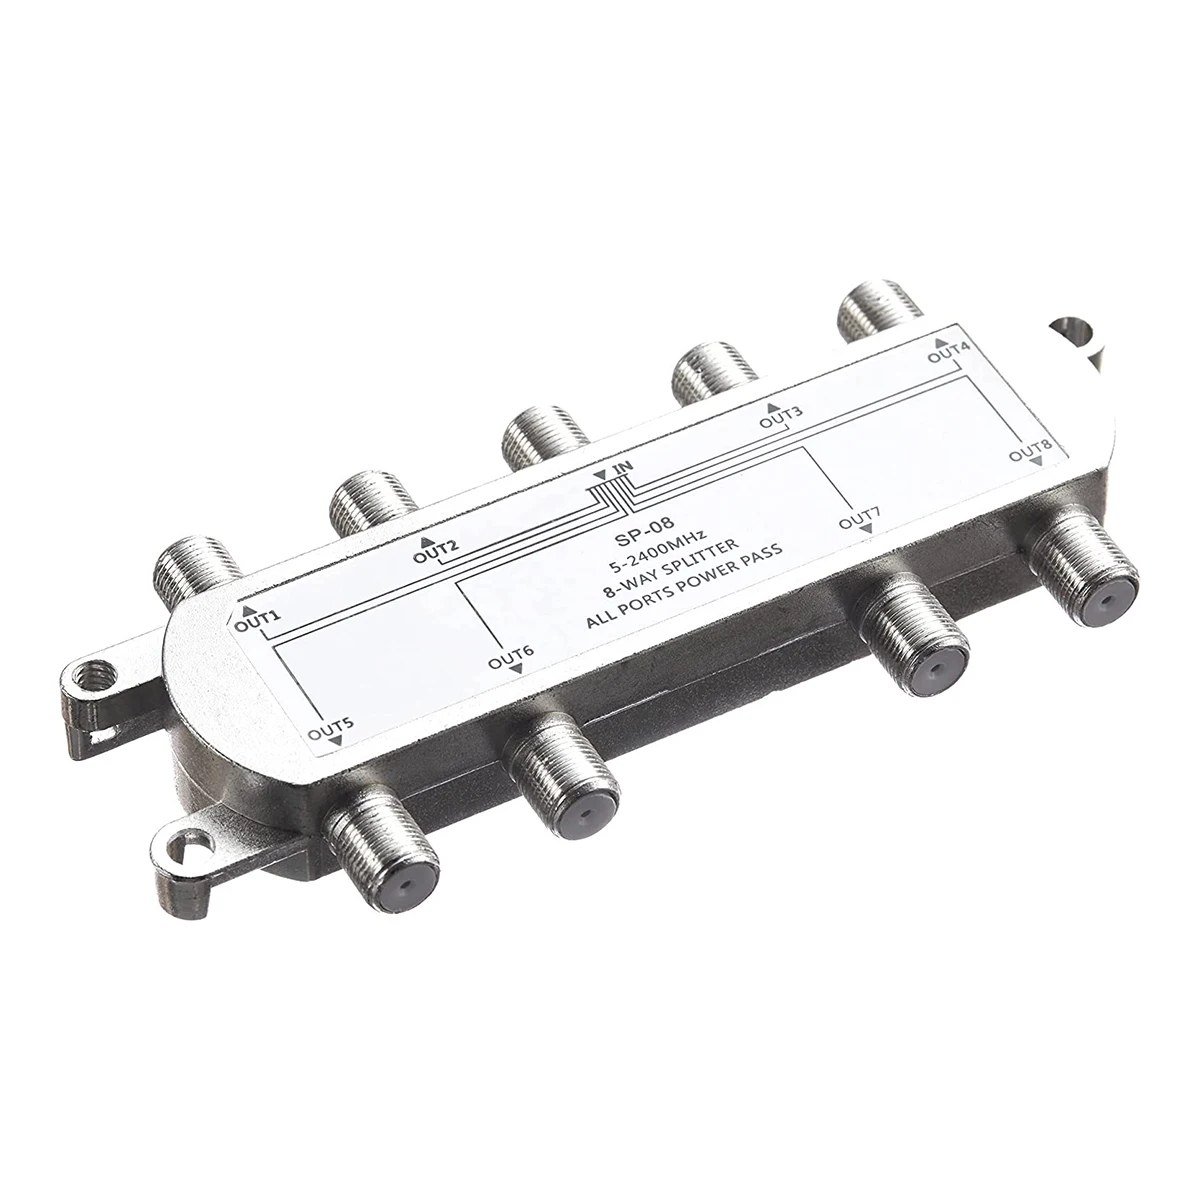 

Digital 8 Way Coaxial Cable Splitter 5-2400MHz, RG6 Compatible, Work with Analog/Digital TV Connections and Internet